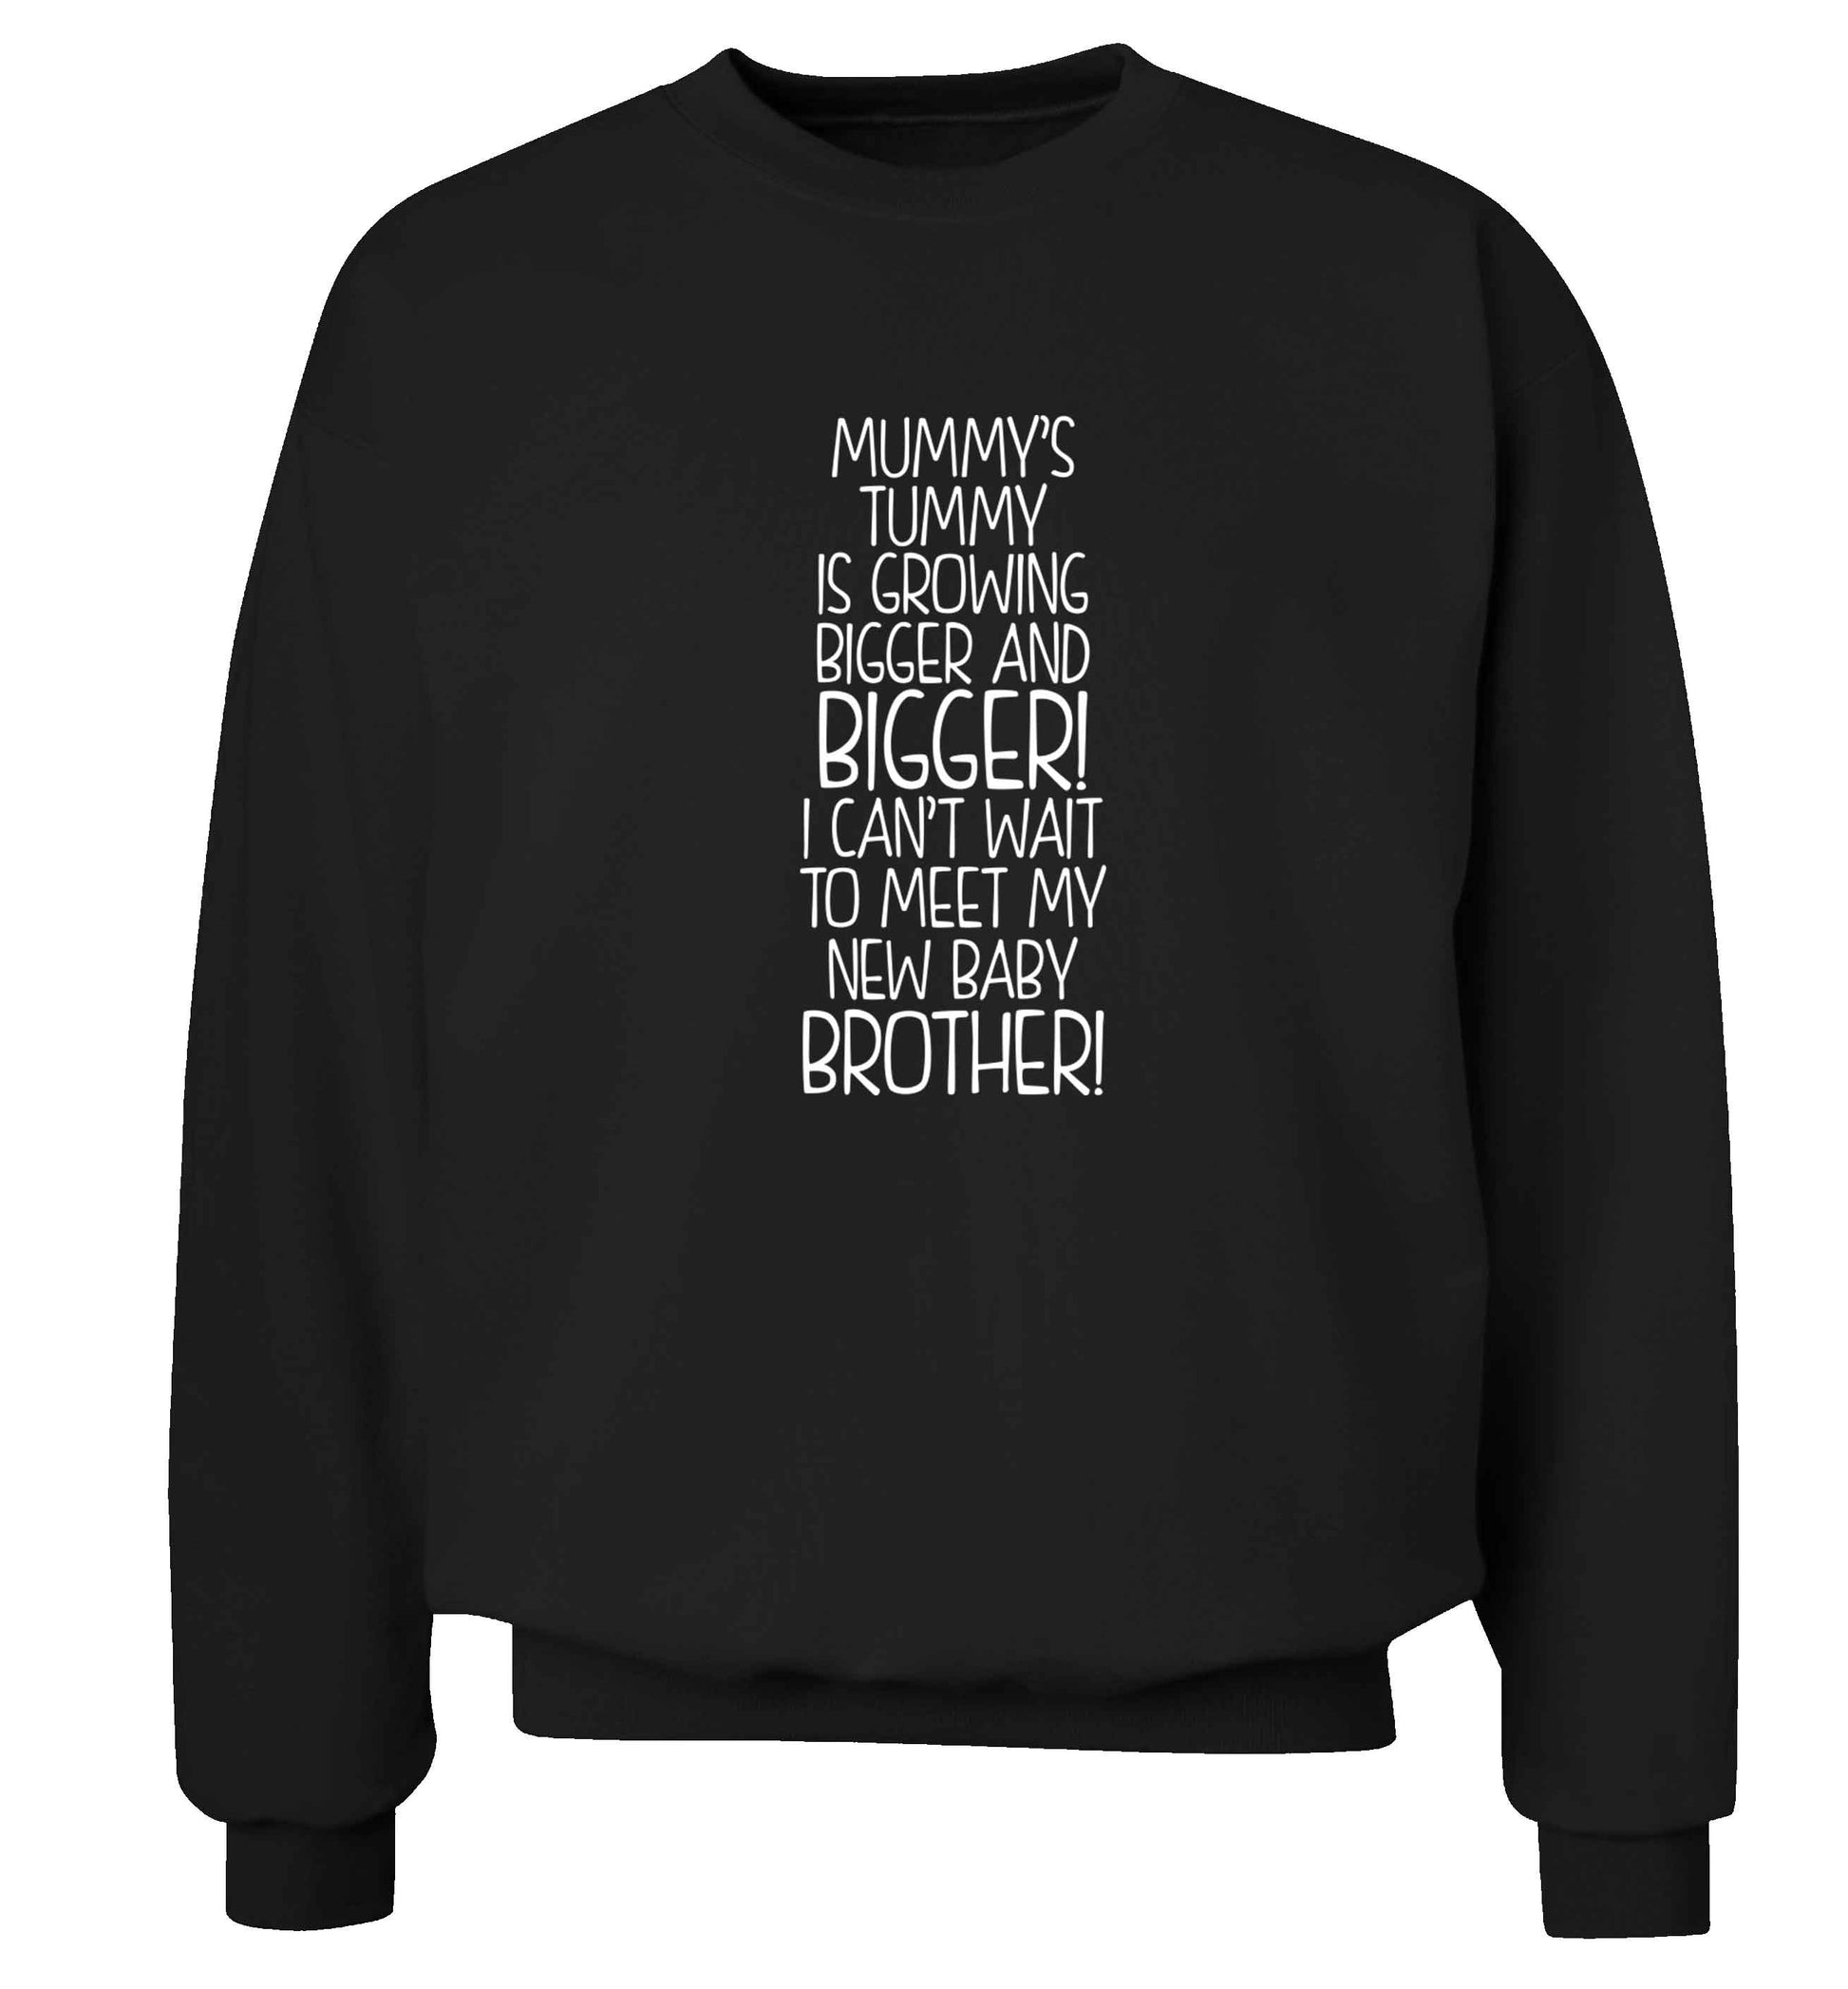 Mummy's tummy is growing bigger and bigger I can't wait to meet my new baby brother! Adult's unisex black Sweater 2XL